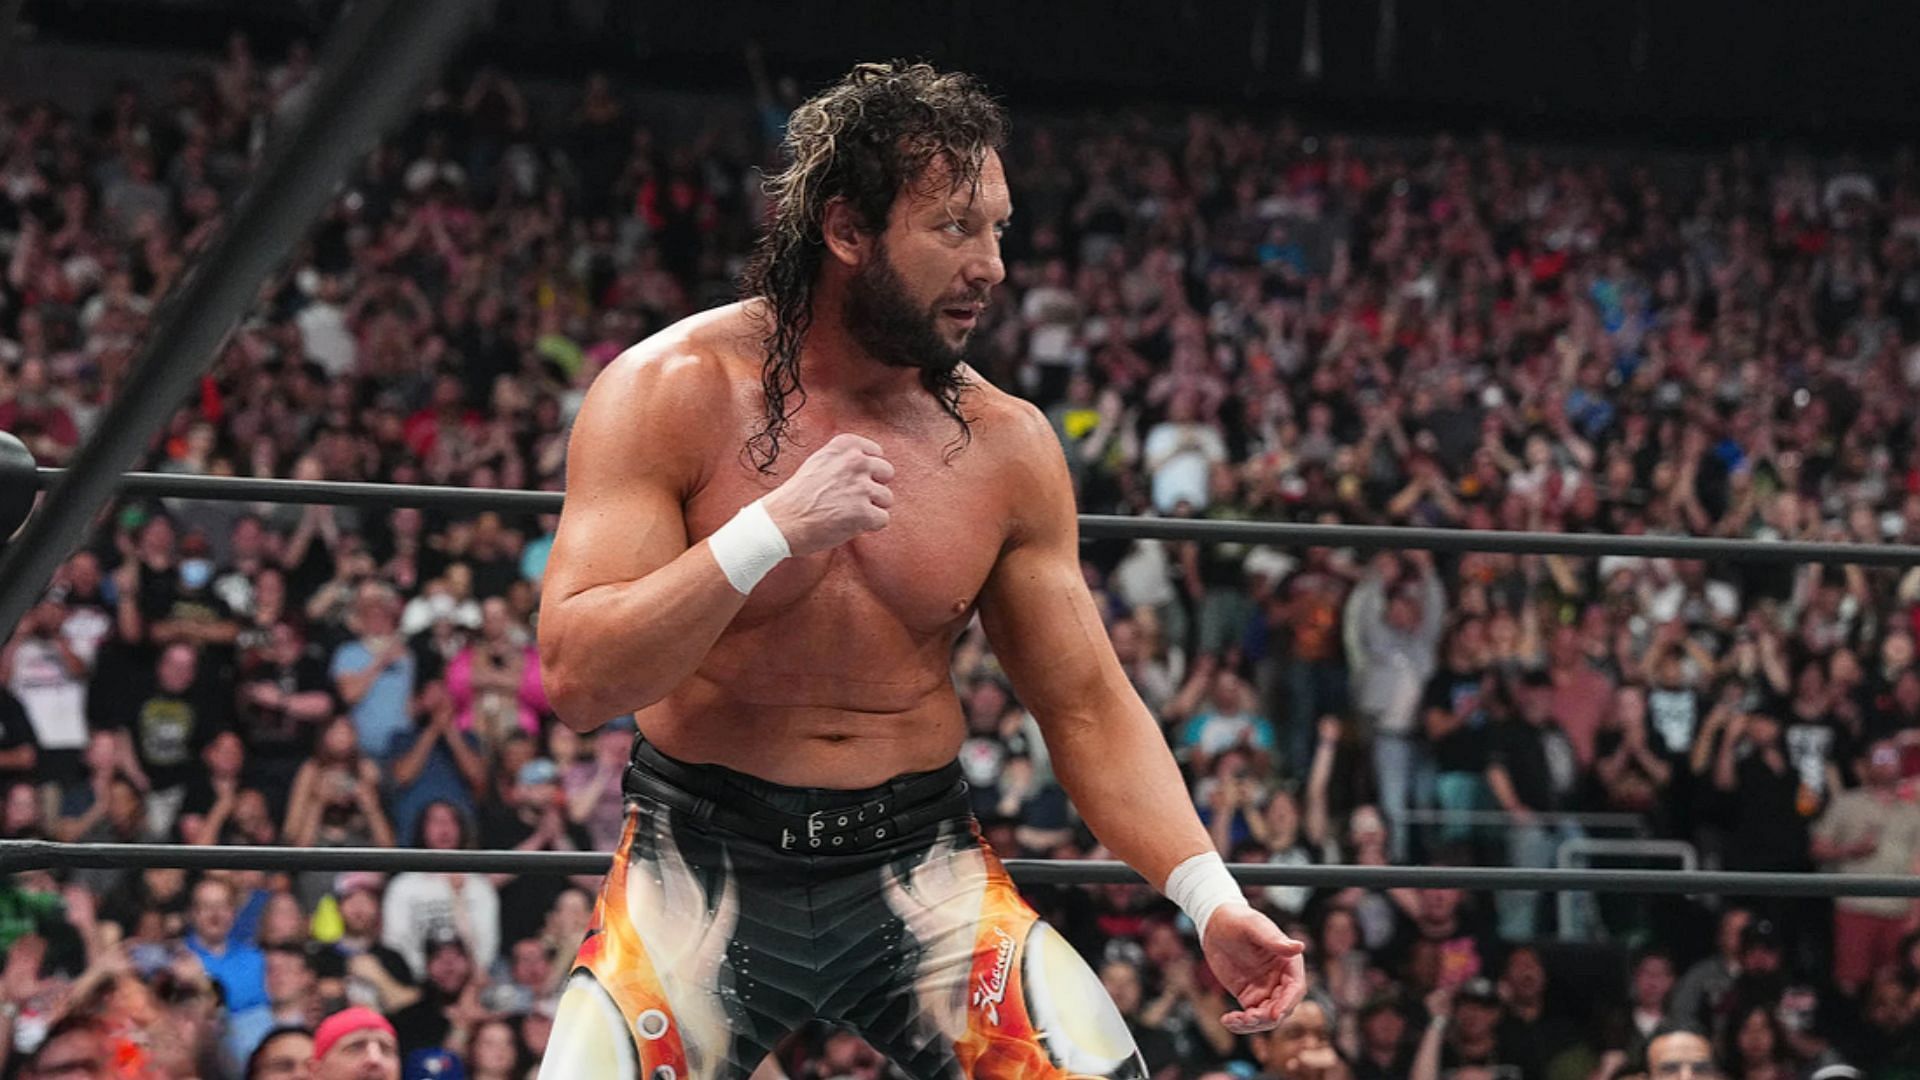 Kenny Omega is a former AEW World Champion [Photo courtesy of AEW Official Website]